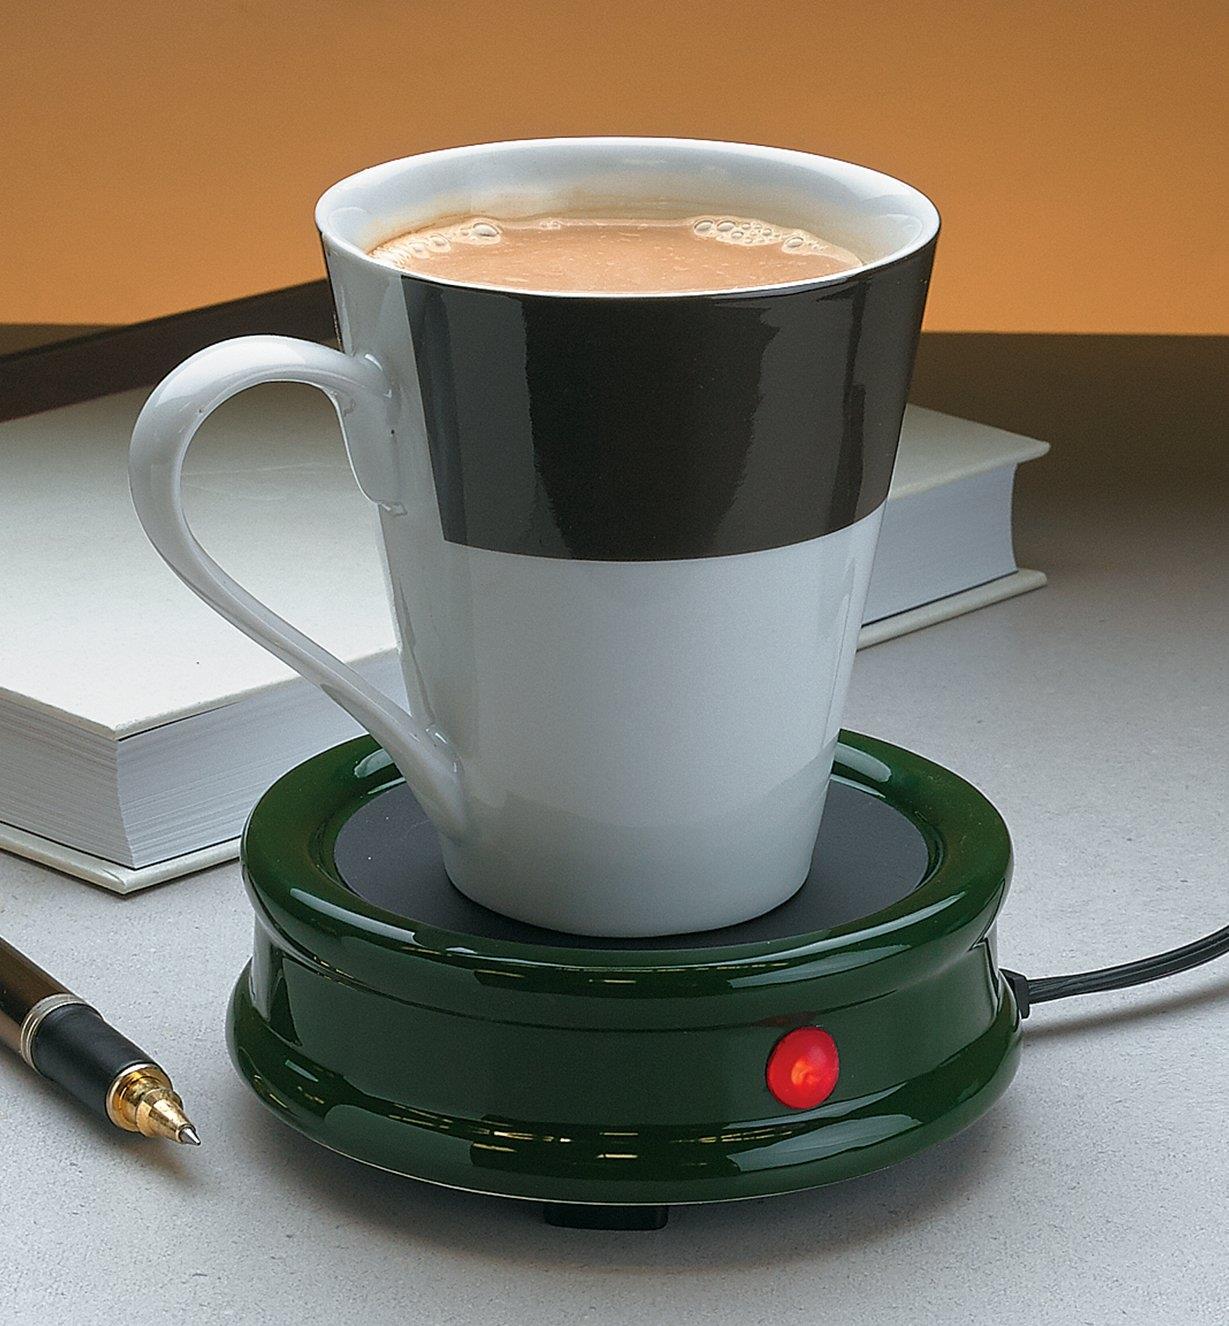 Cup of tea sitting on a Tabletop Warmer